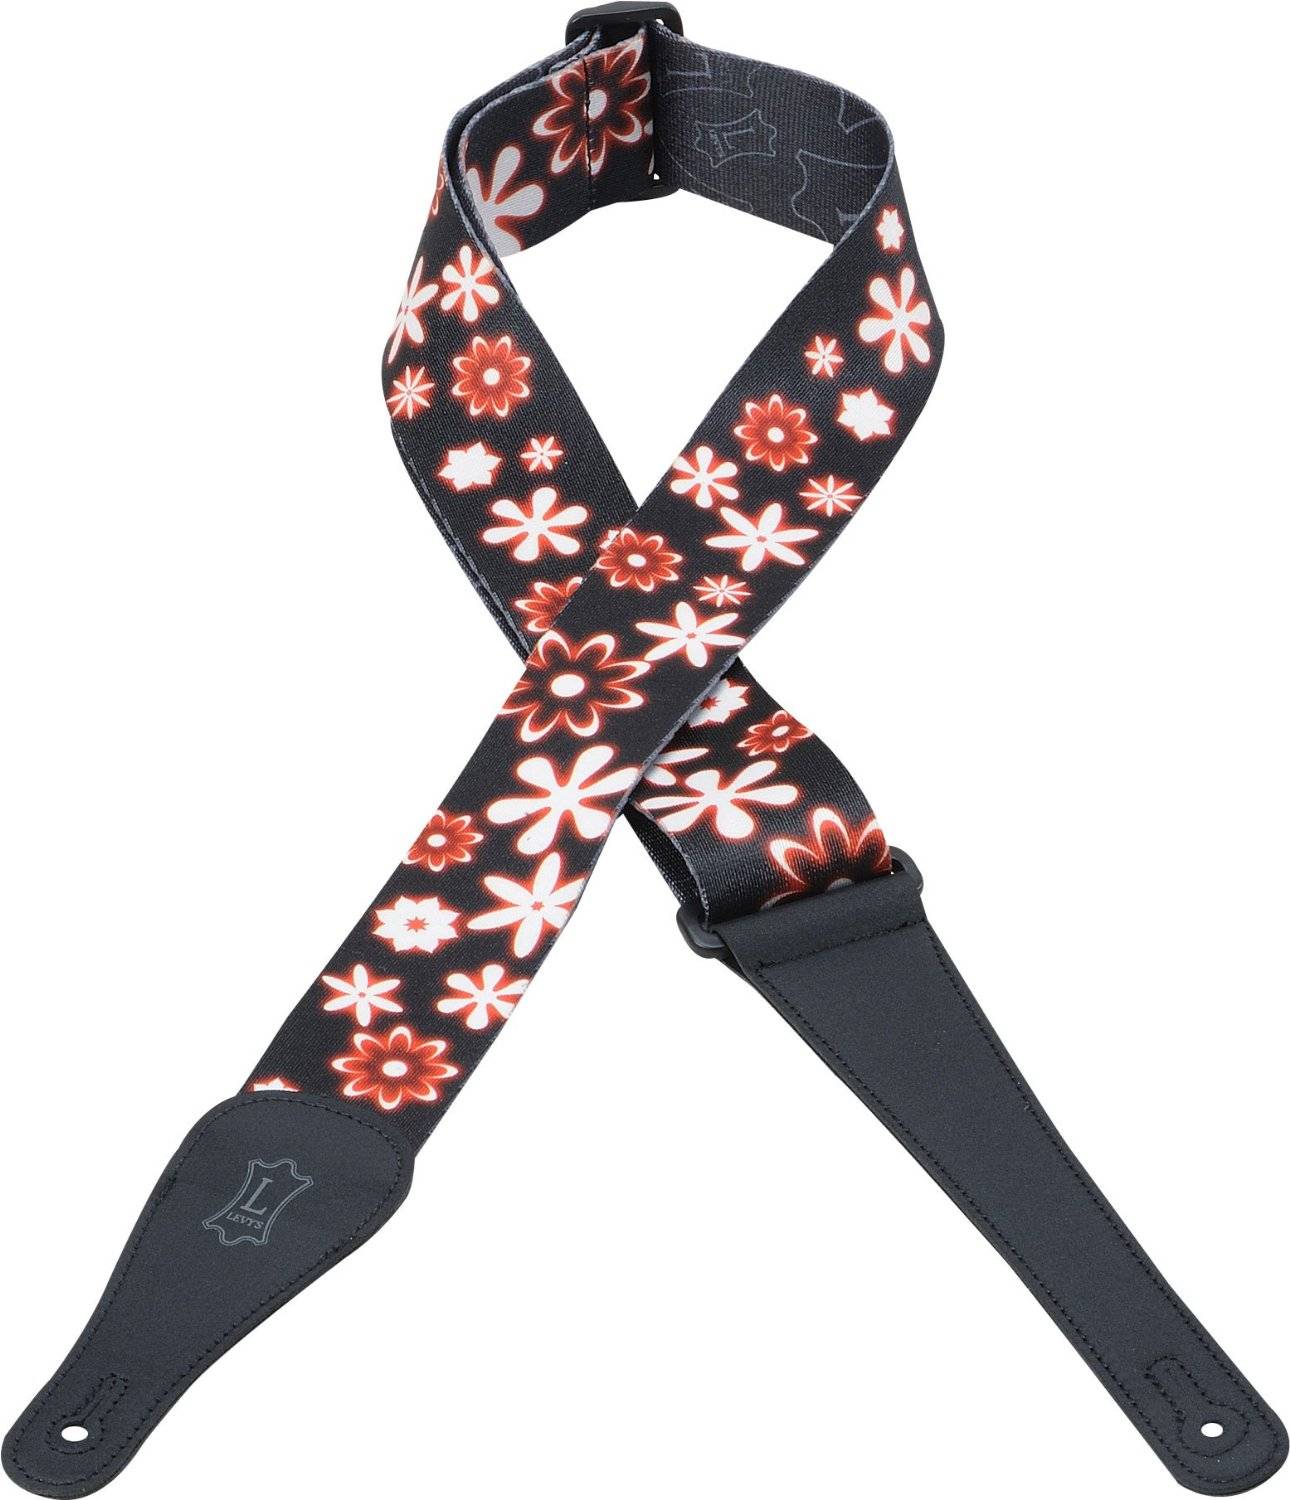 LEVY'S MPD2-003 Polyester Sublimation Print 2" Guitar Strap